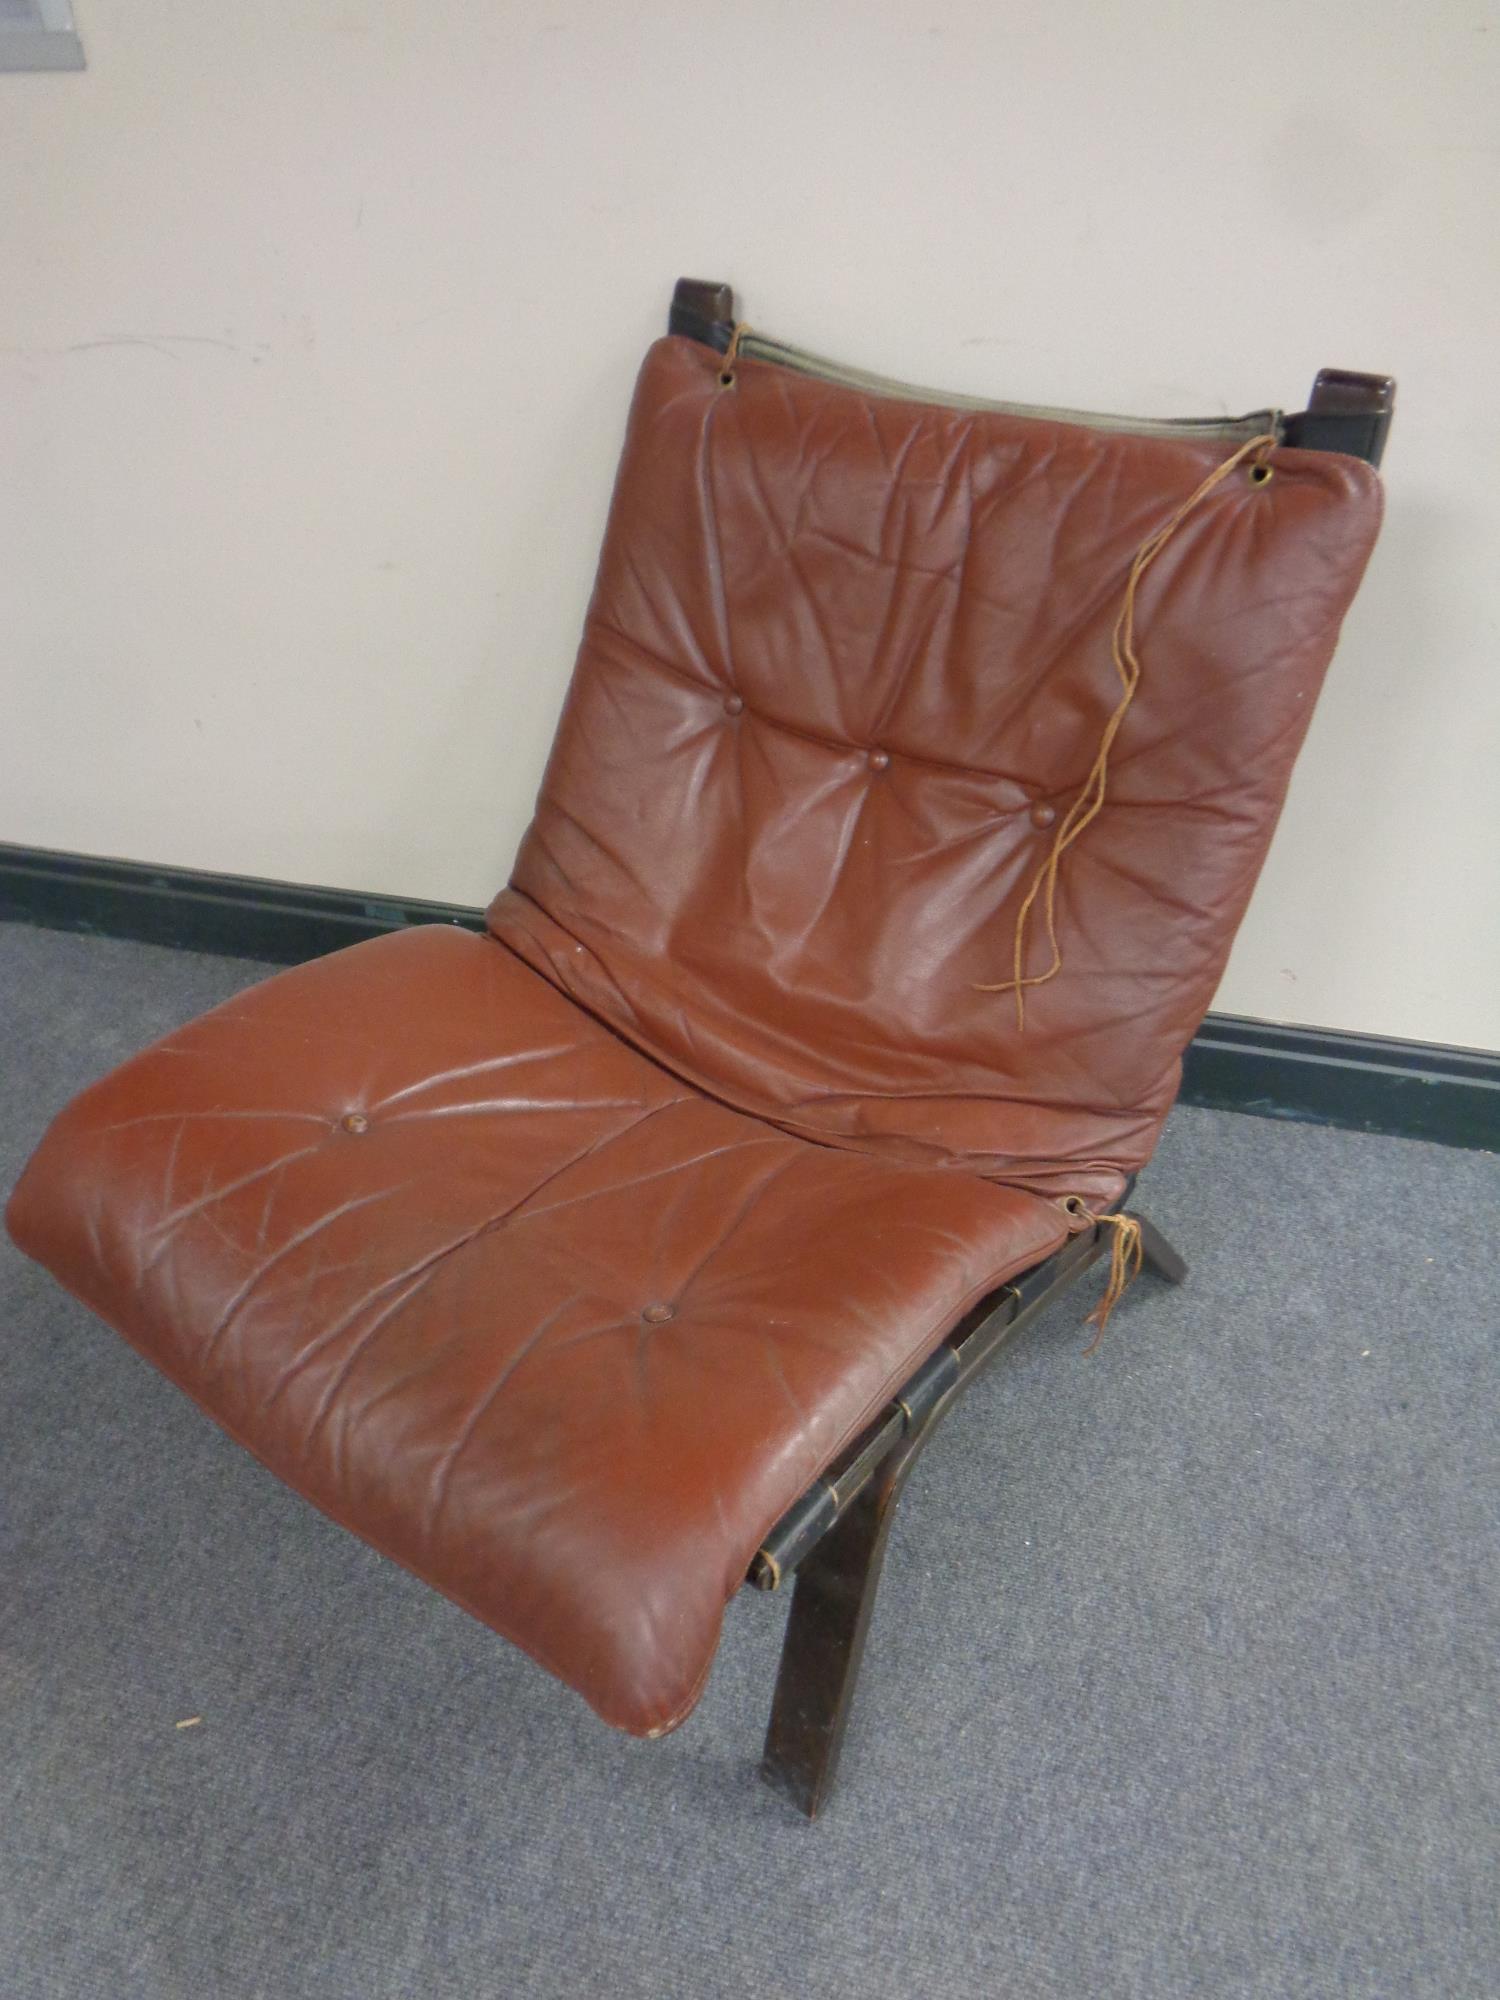 A 20th century Danish low backed lounger chair with brown buttoned leather cushion